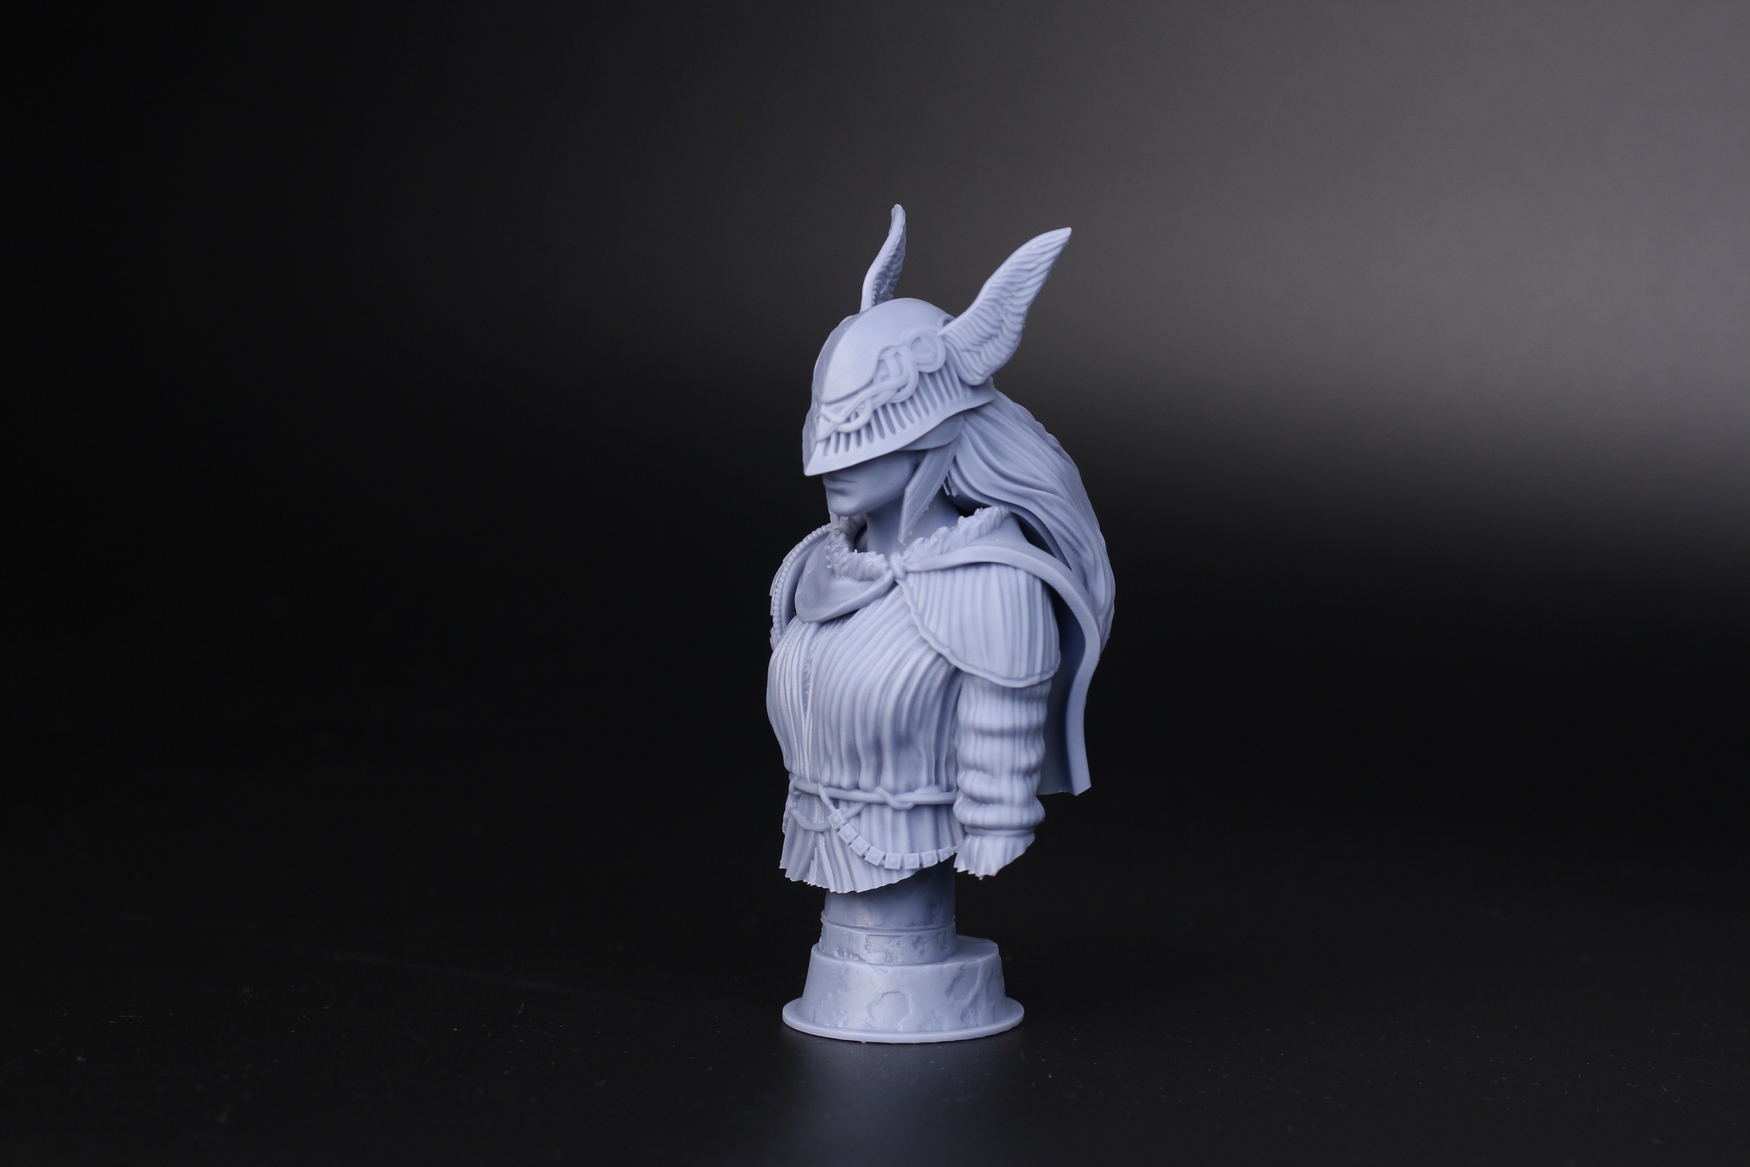 Malenia Bust printed on Anycubic M36 | Anycubic Photon M3 Review: Bridging the gap